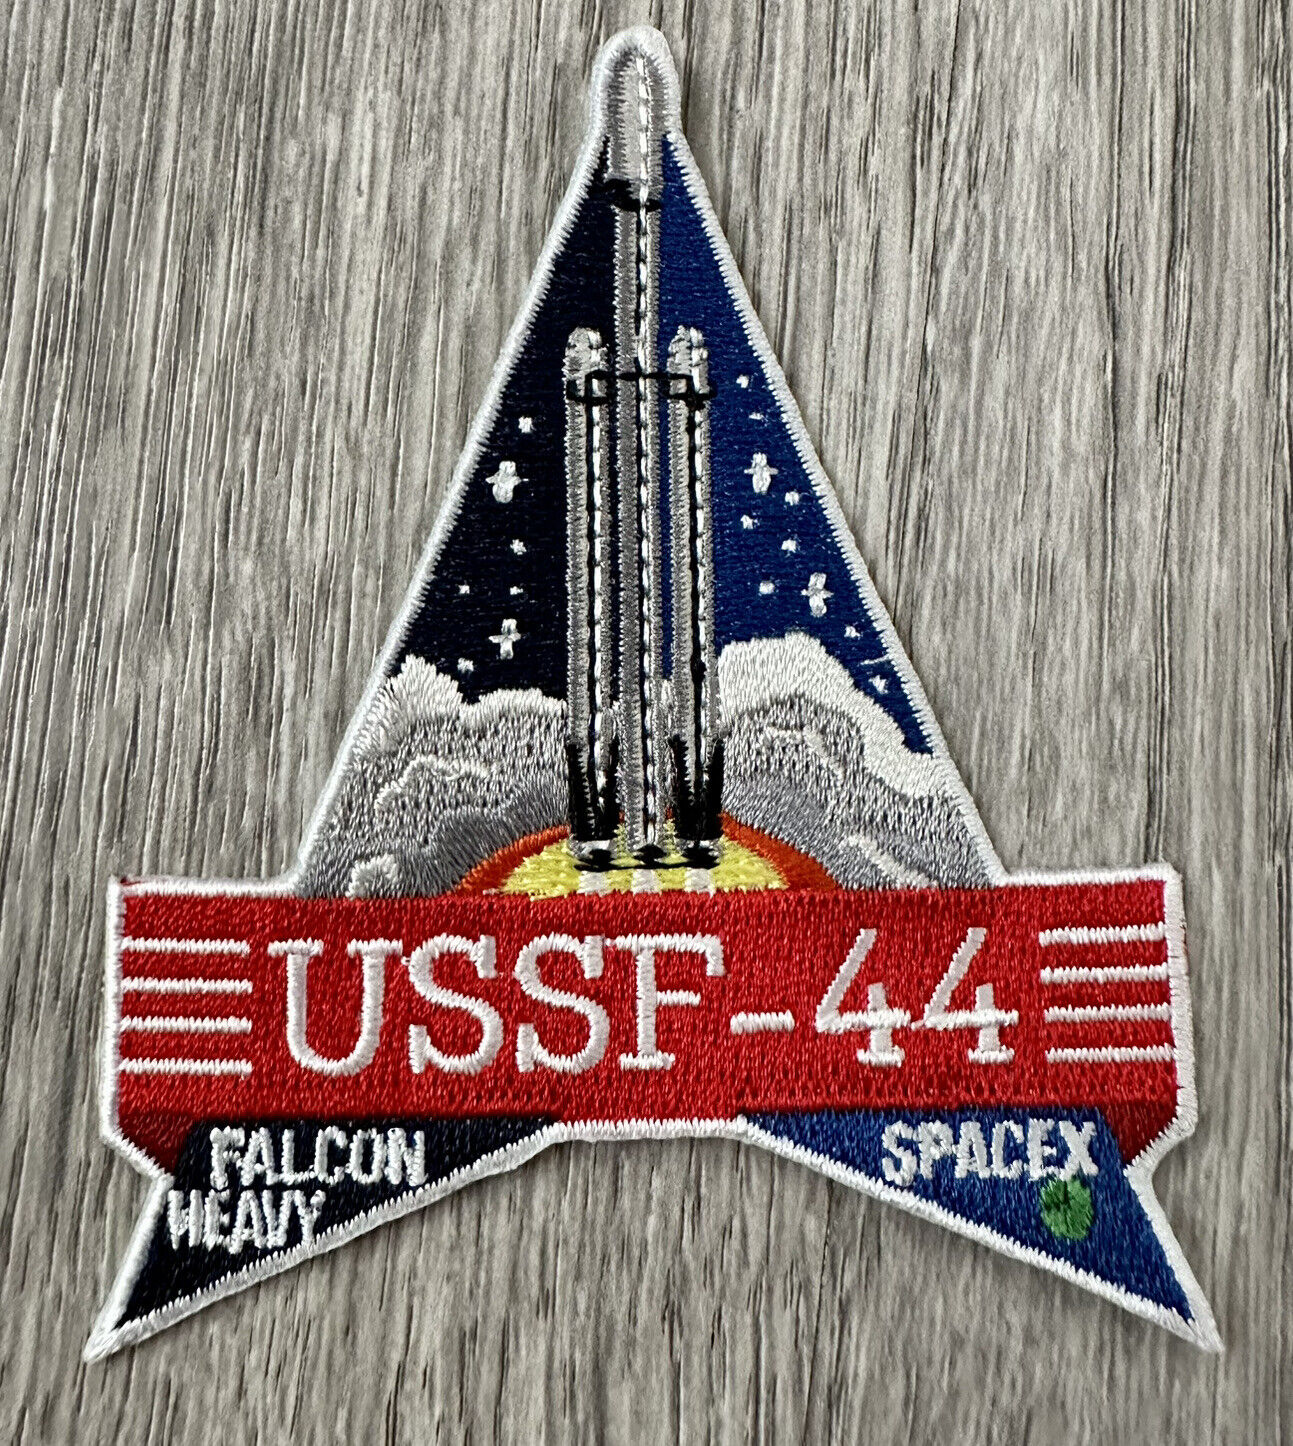 Original SpaceX USSF - 44 Mission Patch NASA Falcon Heavy 3.5”